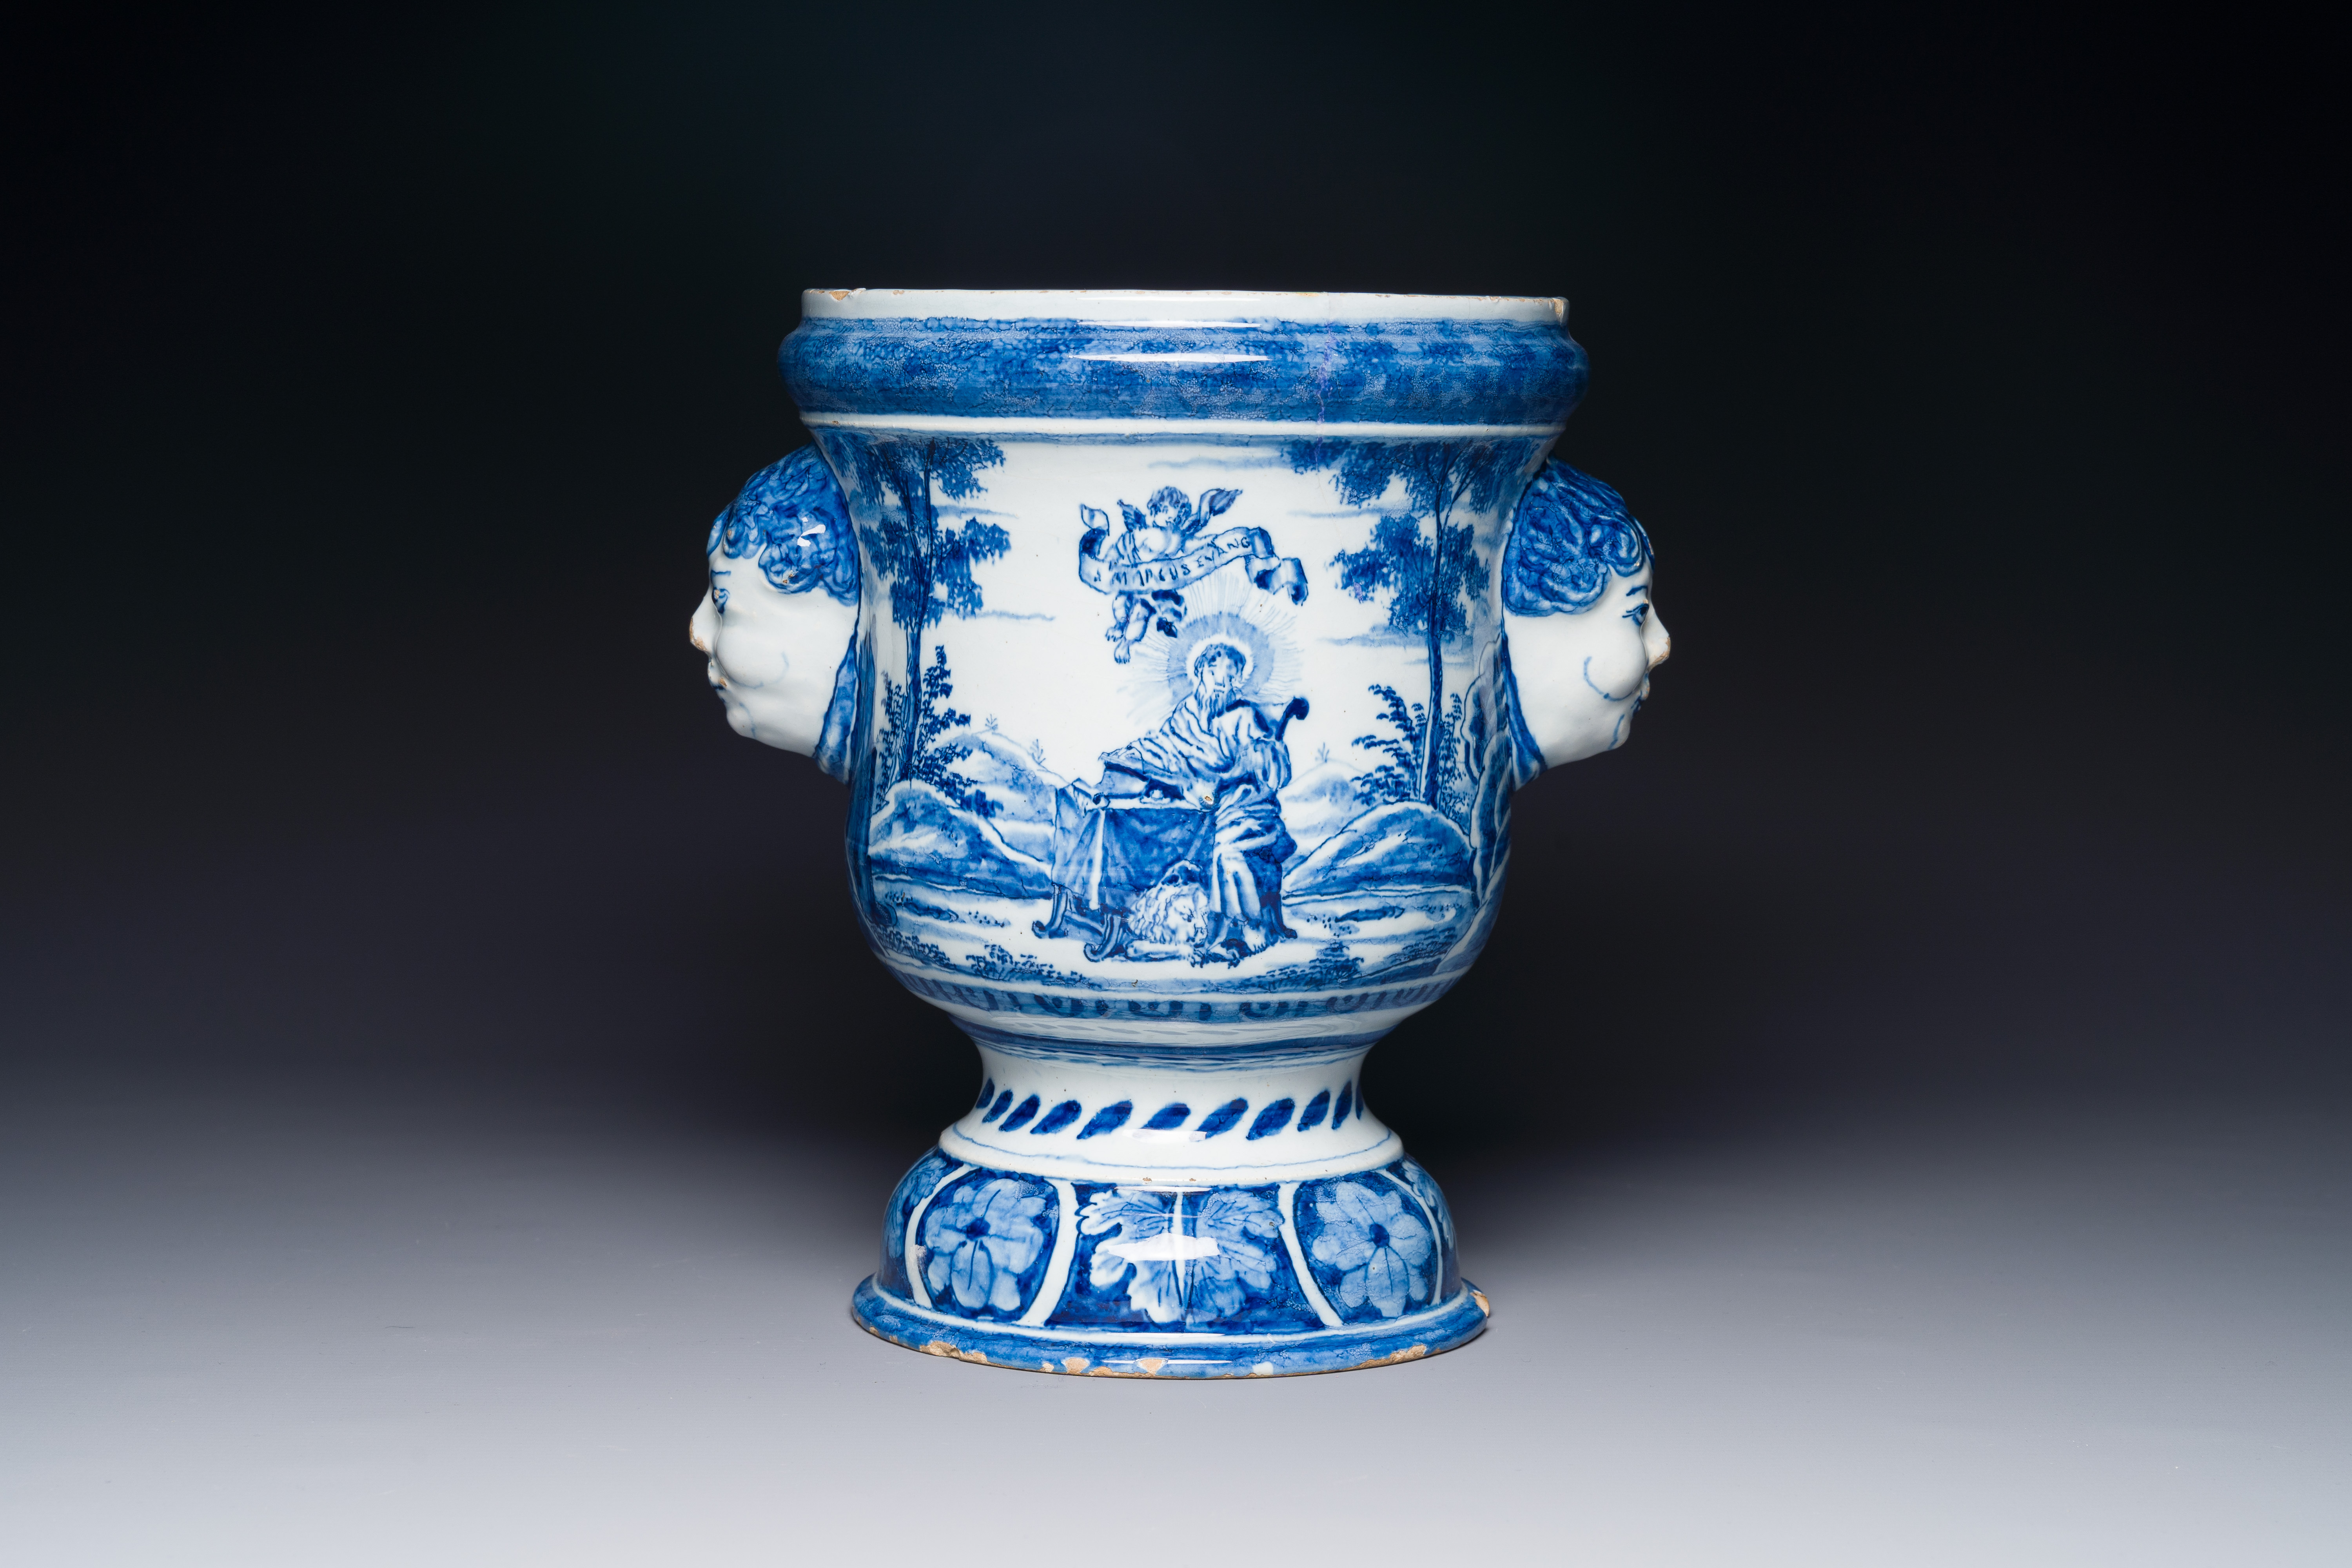 A Dutch Delft blue and white jardiniere depicting Saint Willibrord and John the Baptist, 18th C. - Image 3 of 7